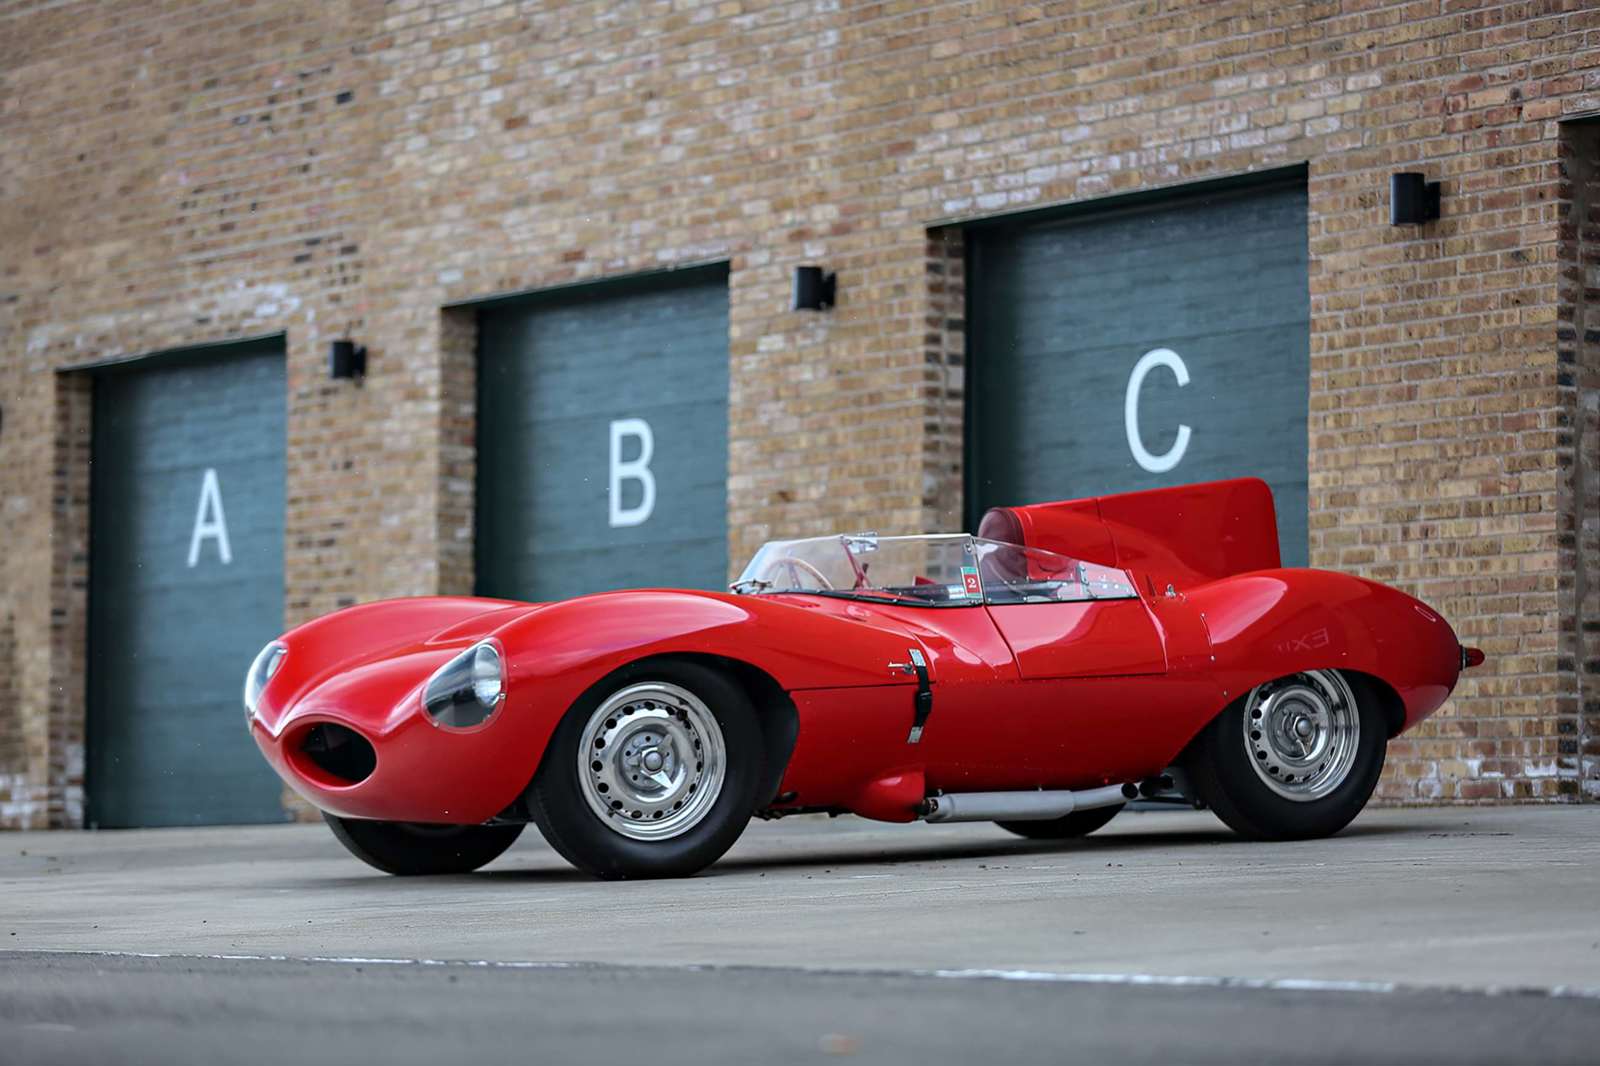 You could own Bernie Ecclestone's old red D-Type